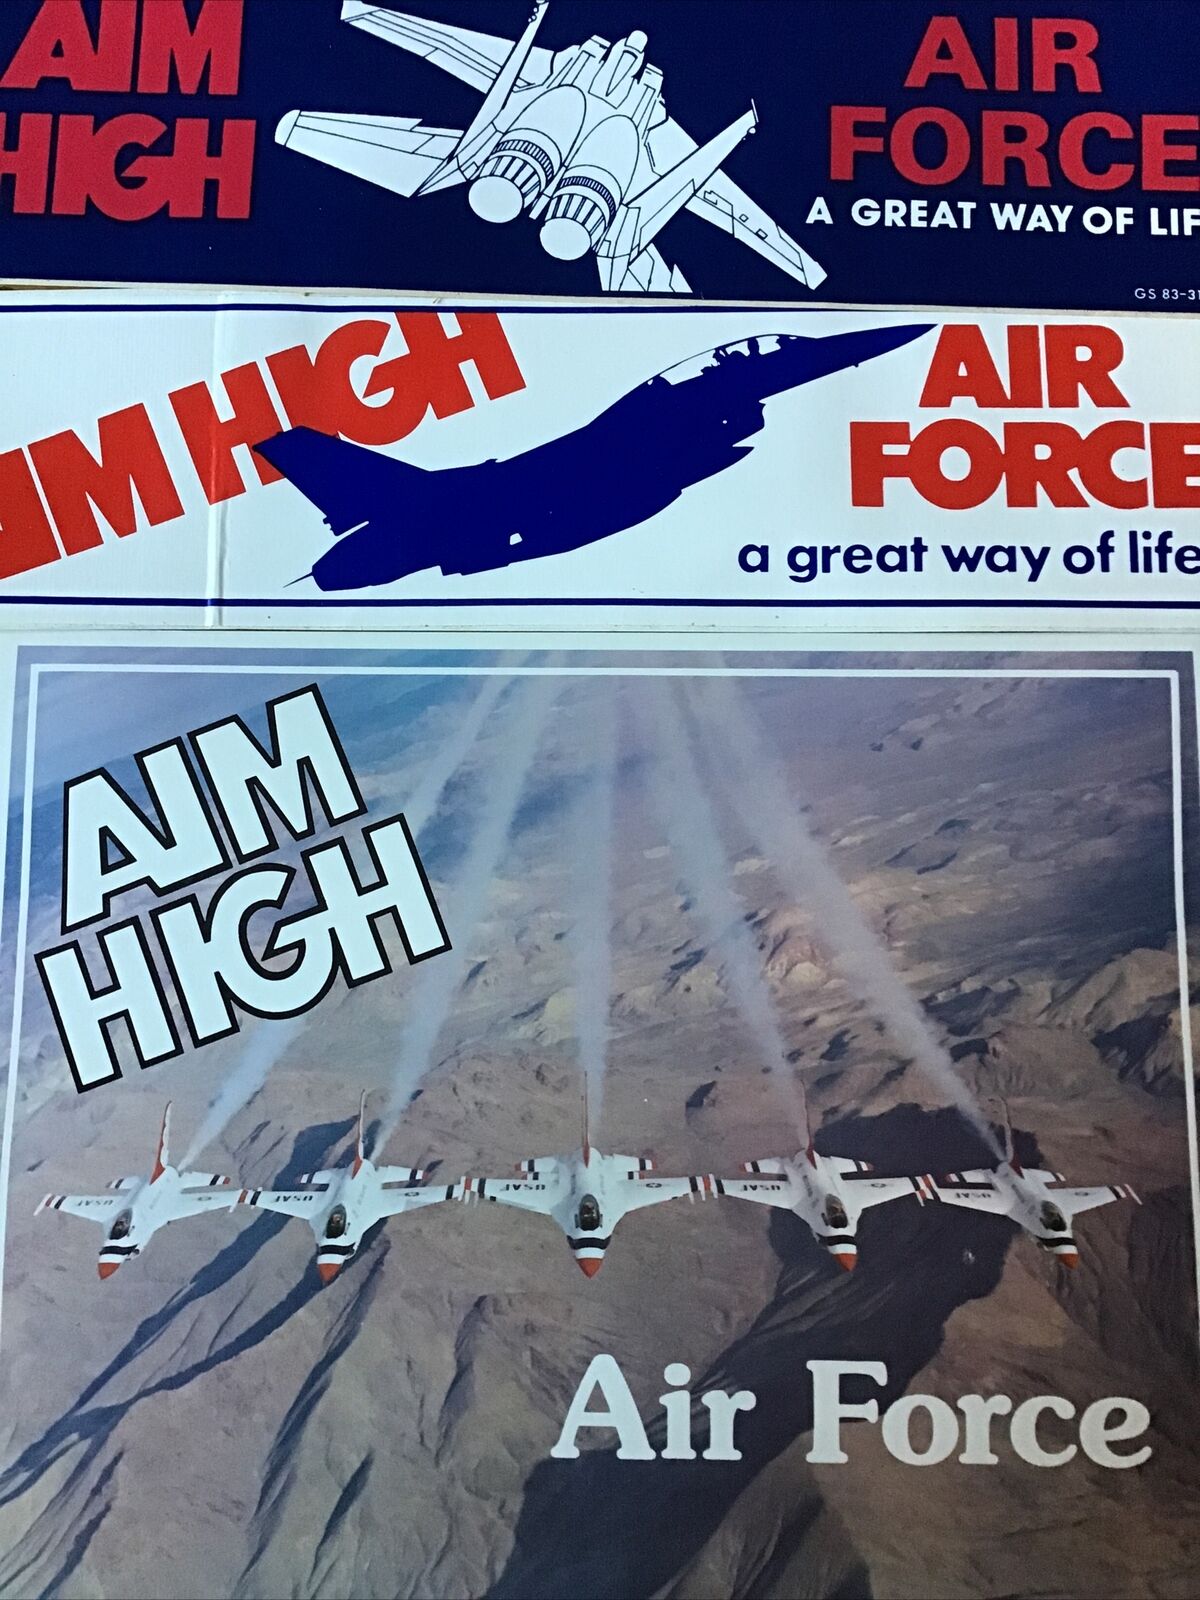 Vintage 1980s Air Force Bumper Stickers and Recruiting photograph  “Aim High”